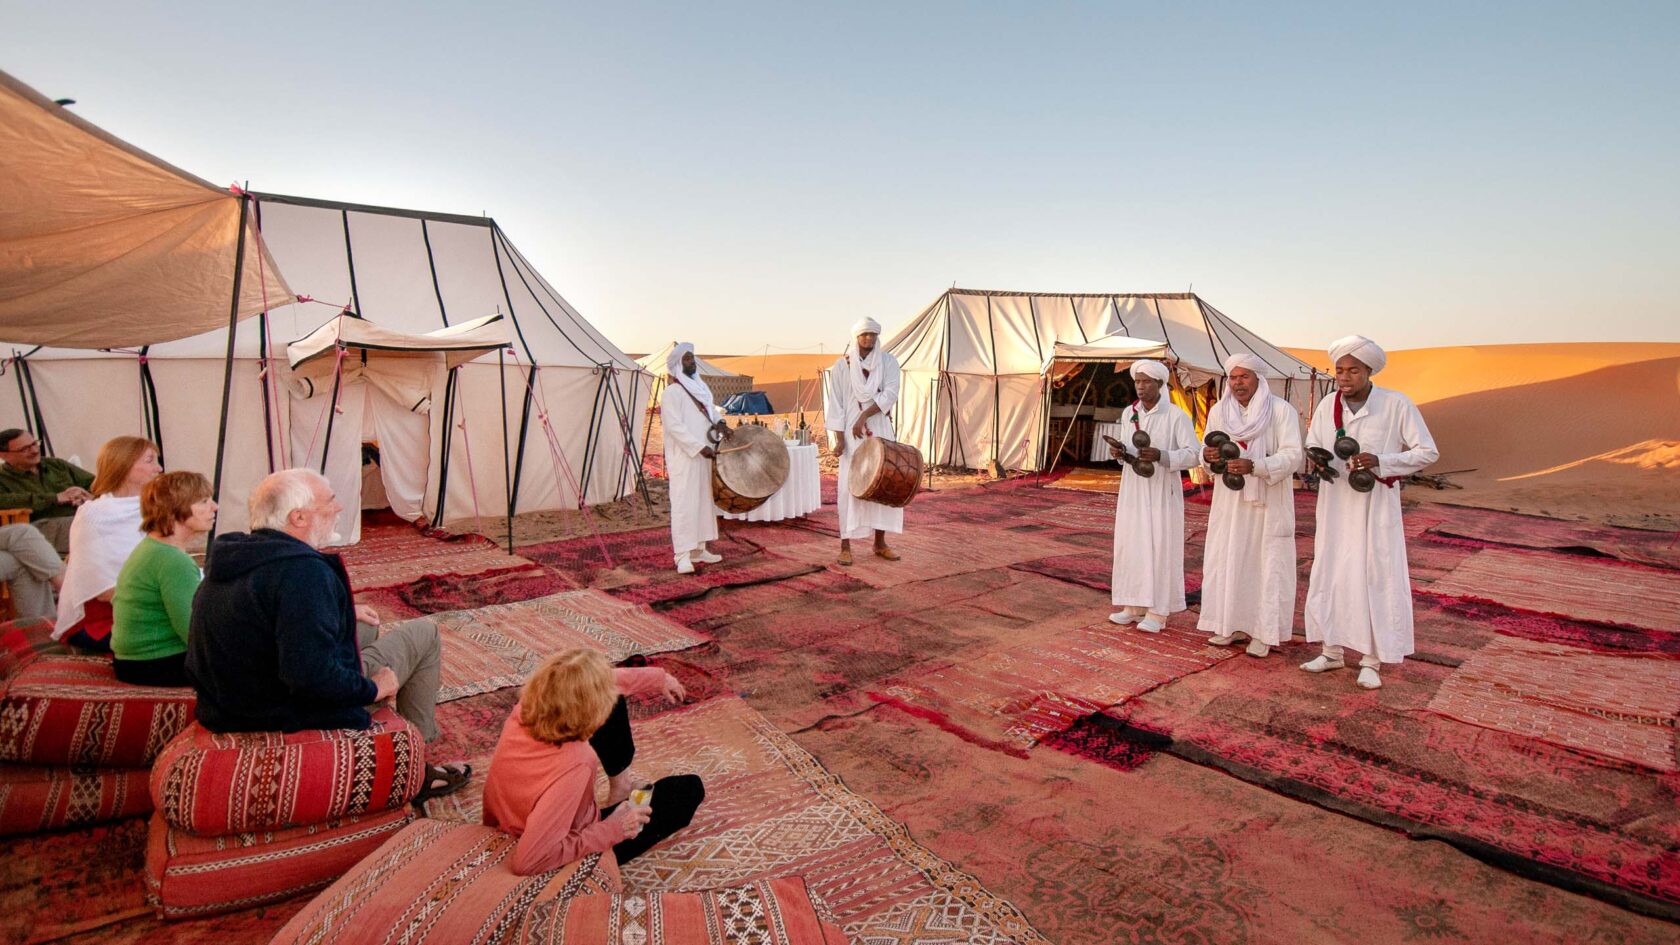 Travelers lounge on Moroccan trugs and futons as they listen to white-robed musicians in the Sahara Desert.